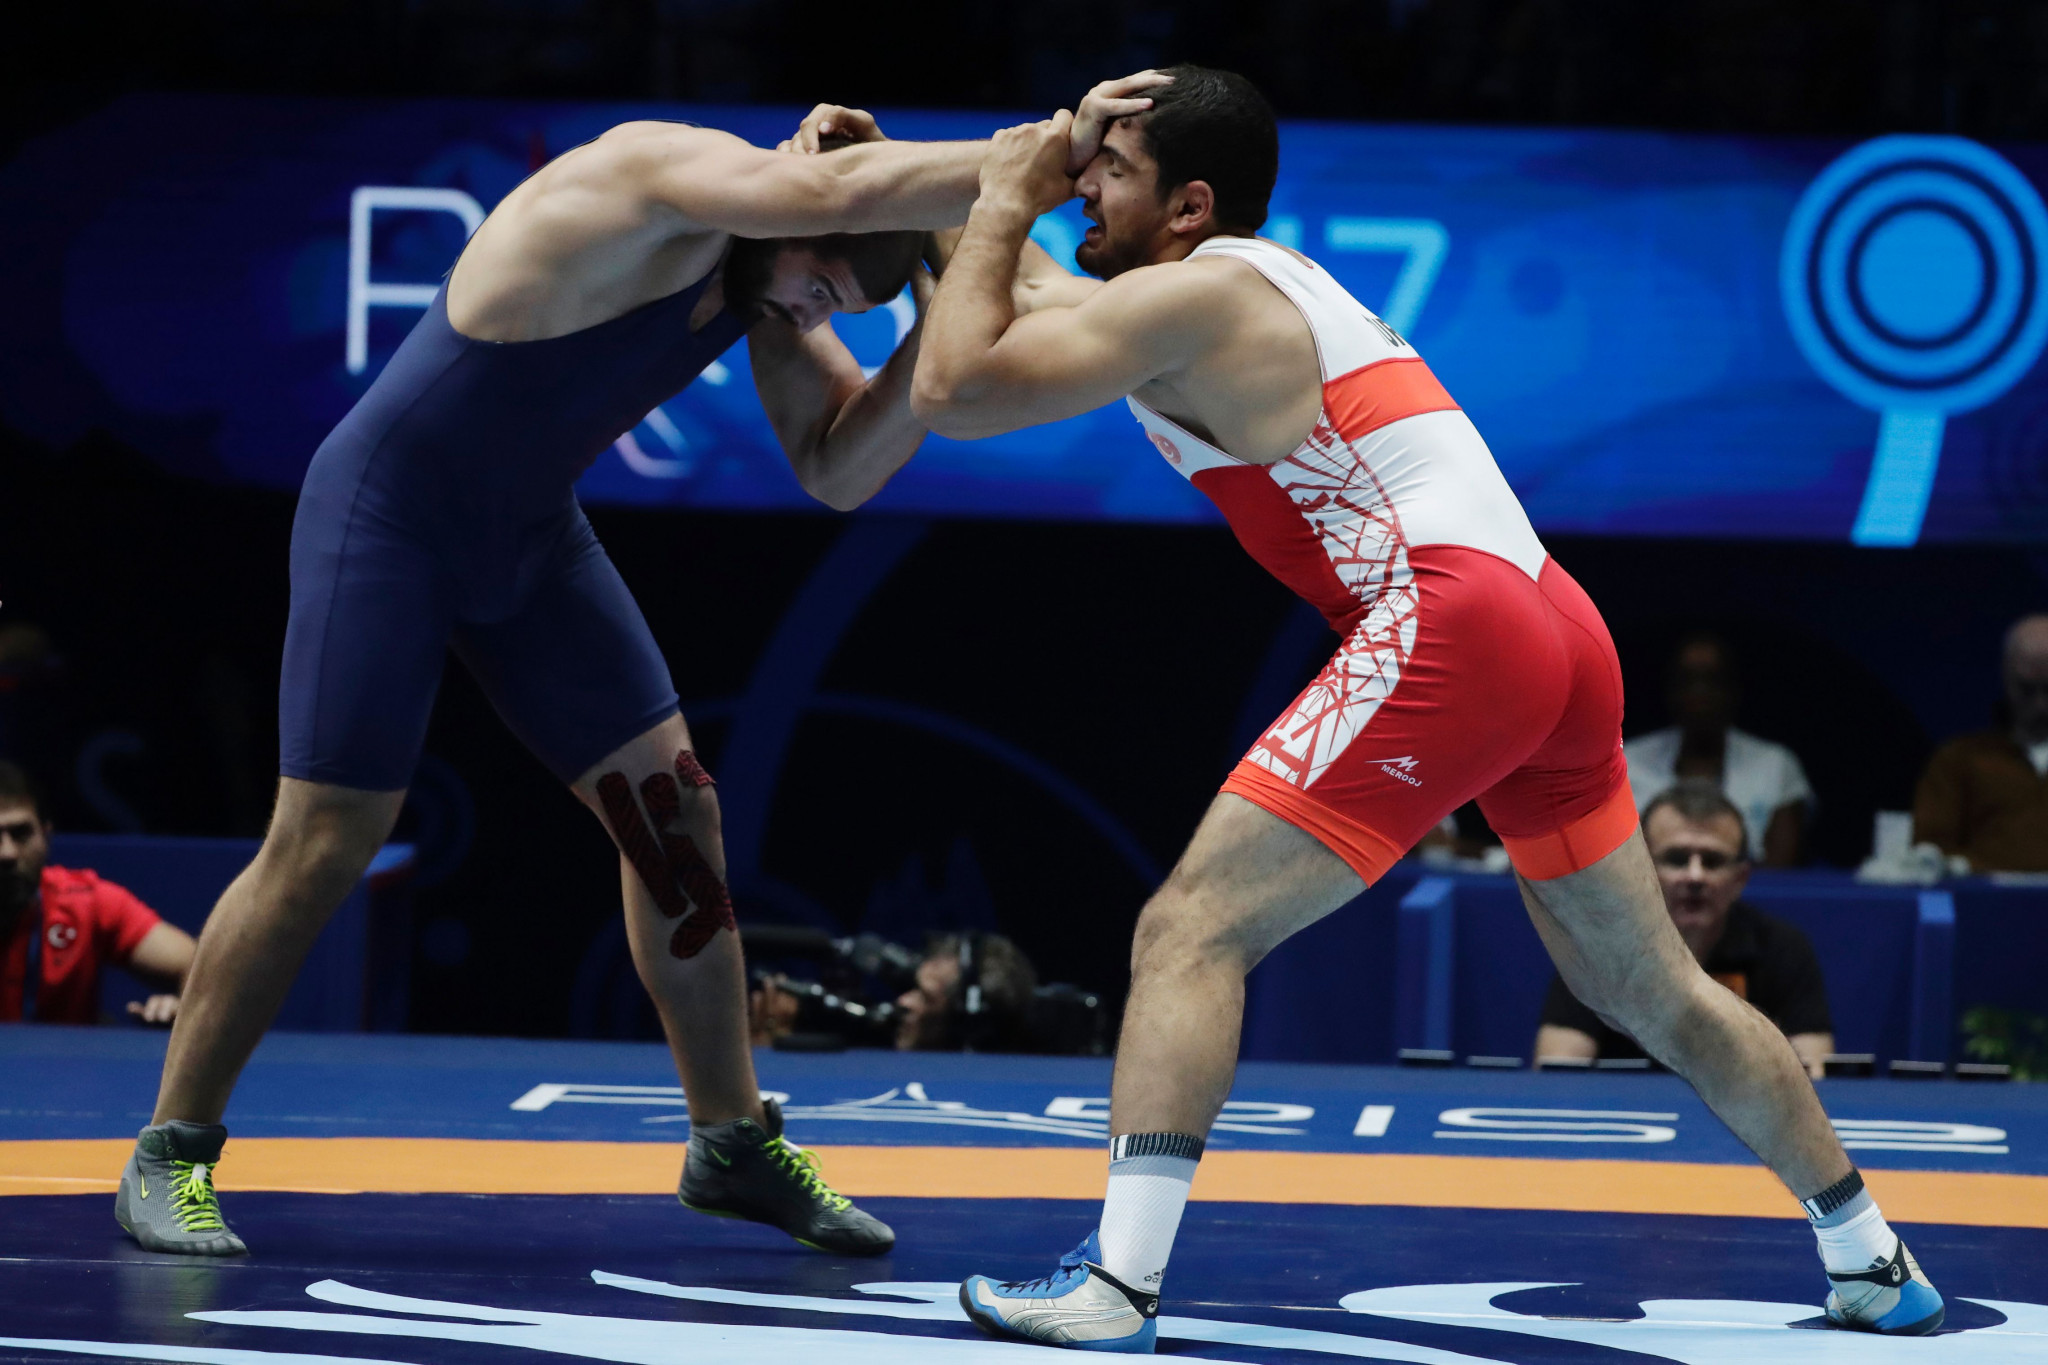 The host of the 2019 Senior Wrestling World Championships has been announced as Astana, Kazakhstan ©Getty Images